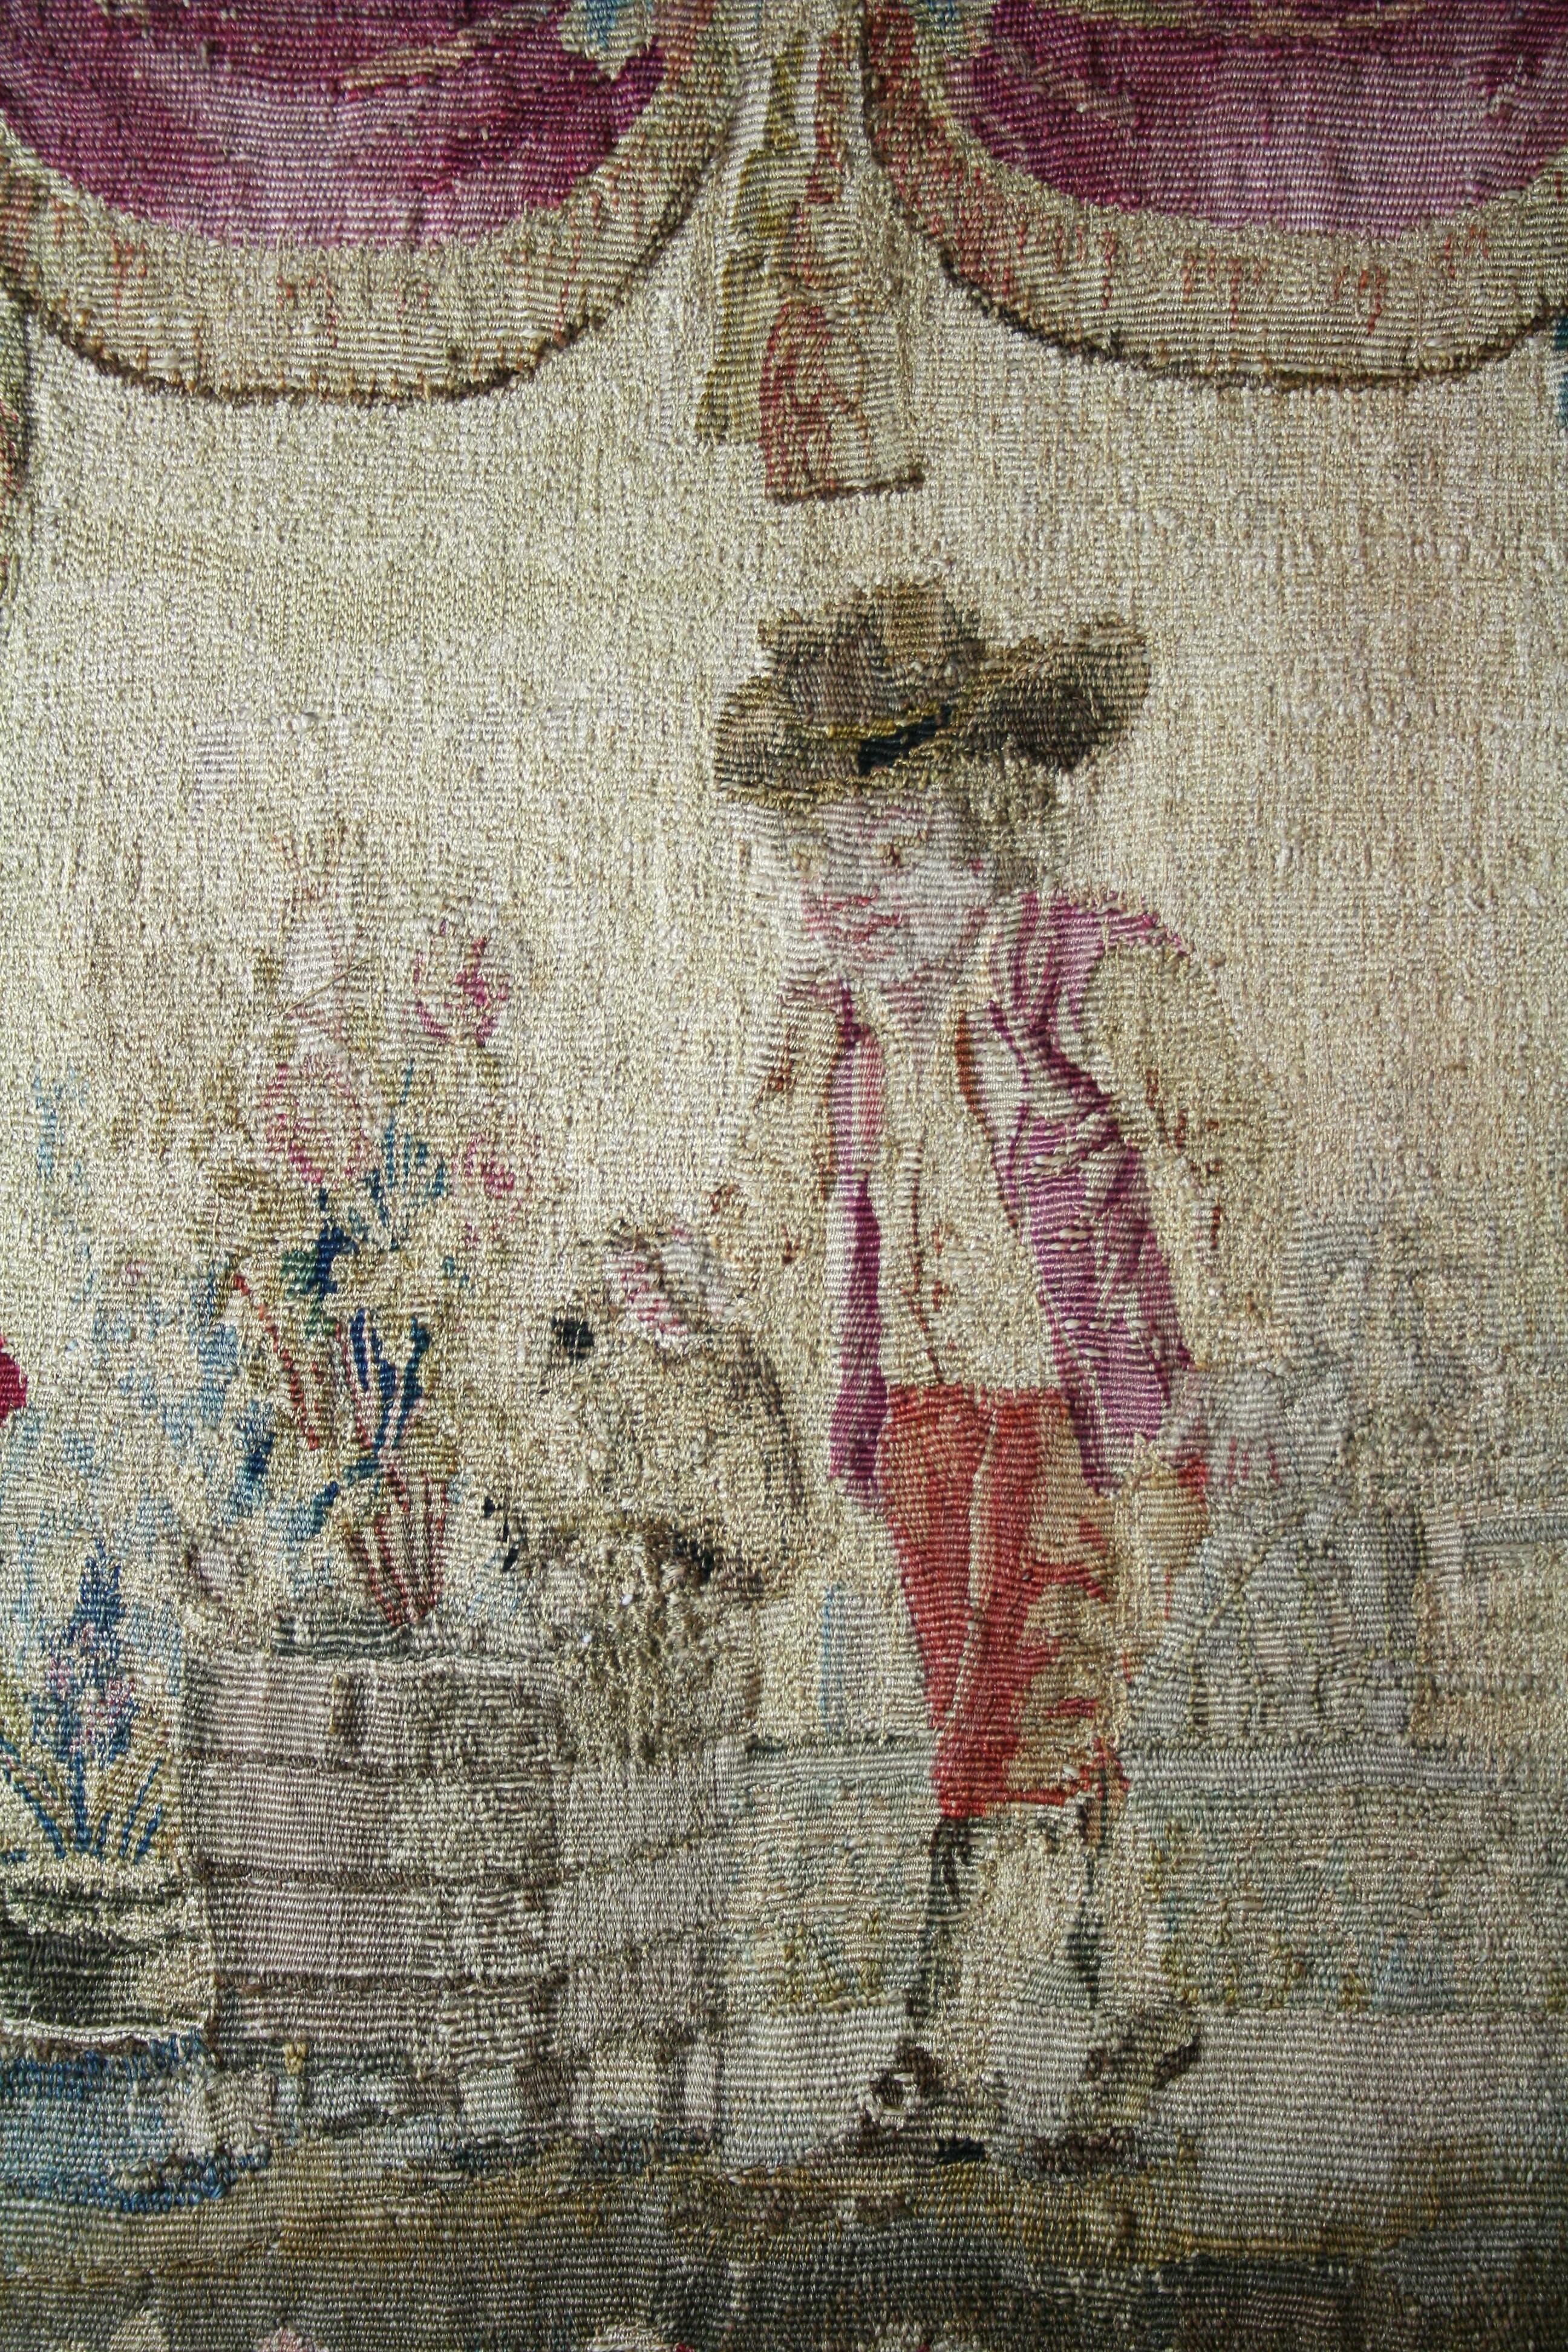 Charming Aubusson tapestry representing a small gardener watering plants in a jardinière.
Aubusson is a town in central France where tapestry workshops were installed which had their peak in the 17th and 18th century,
France,
Second half of the